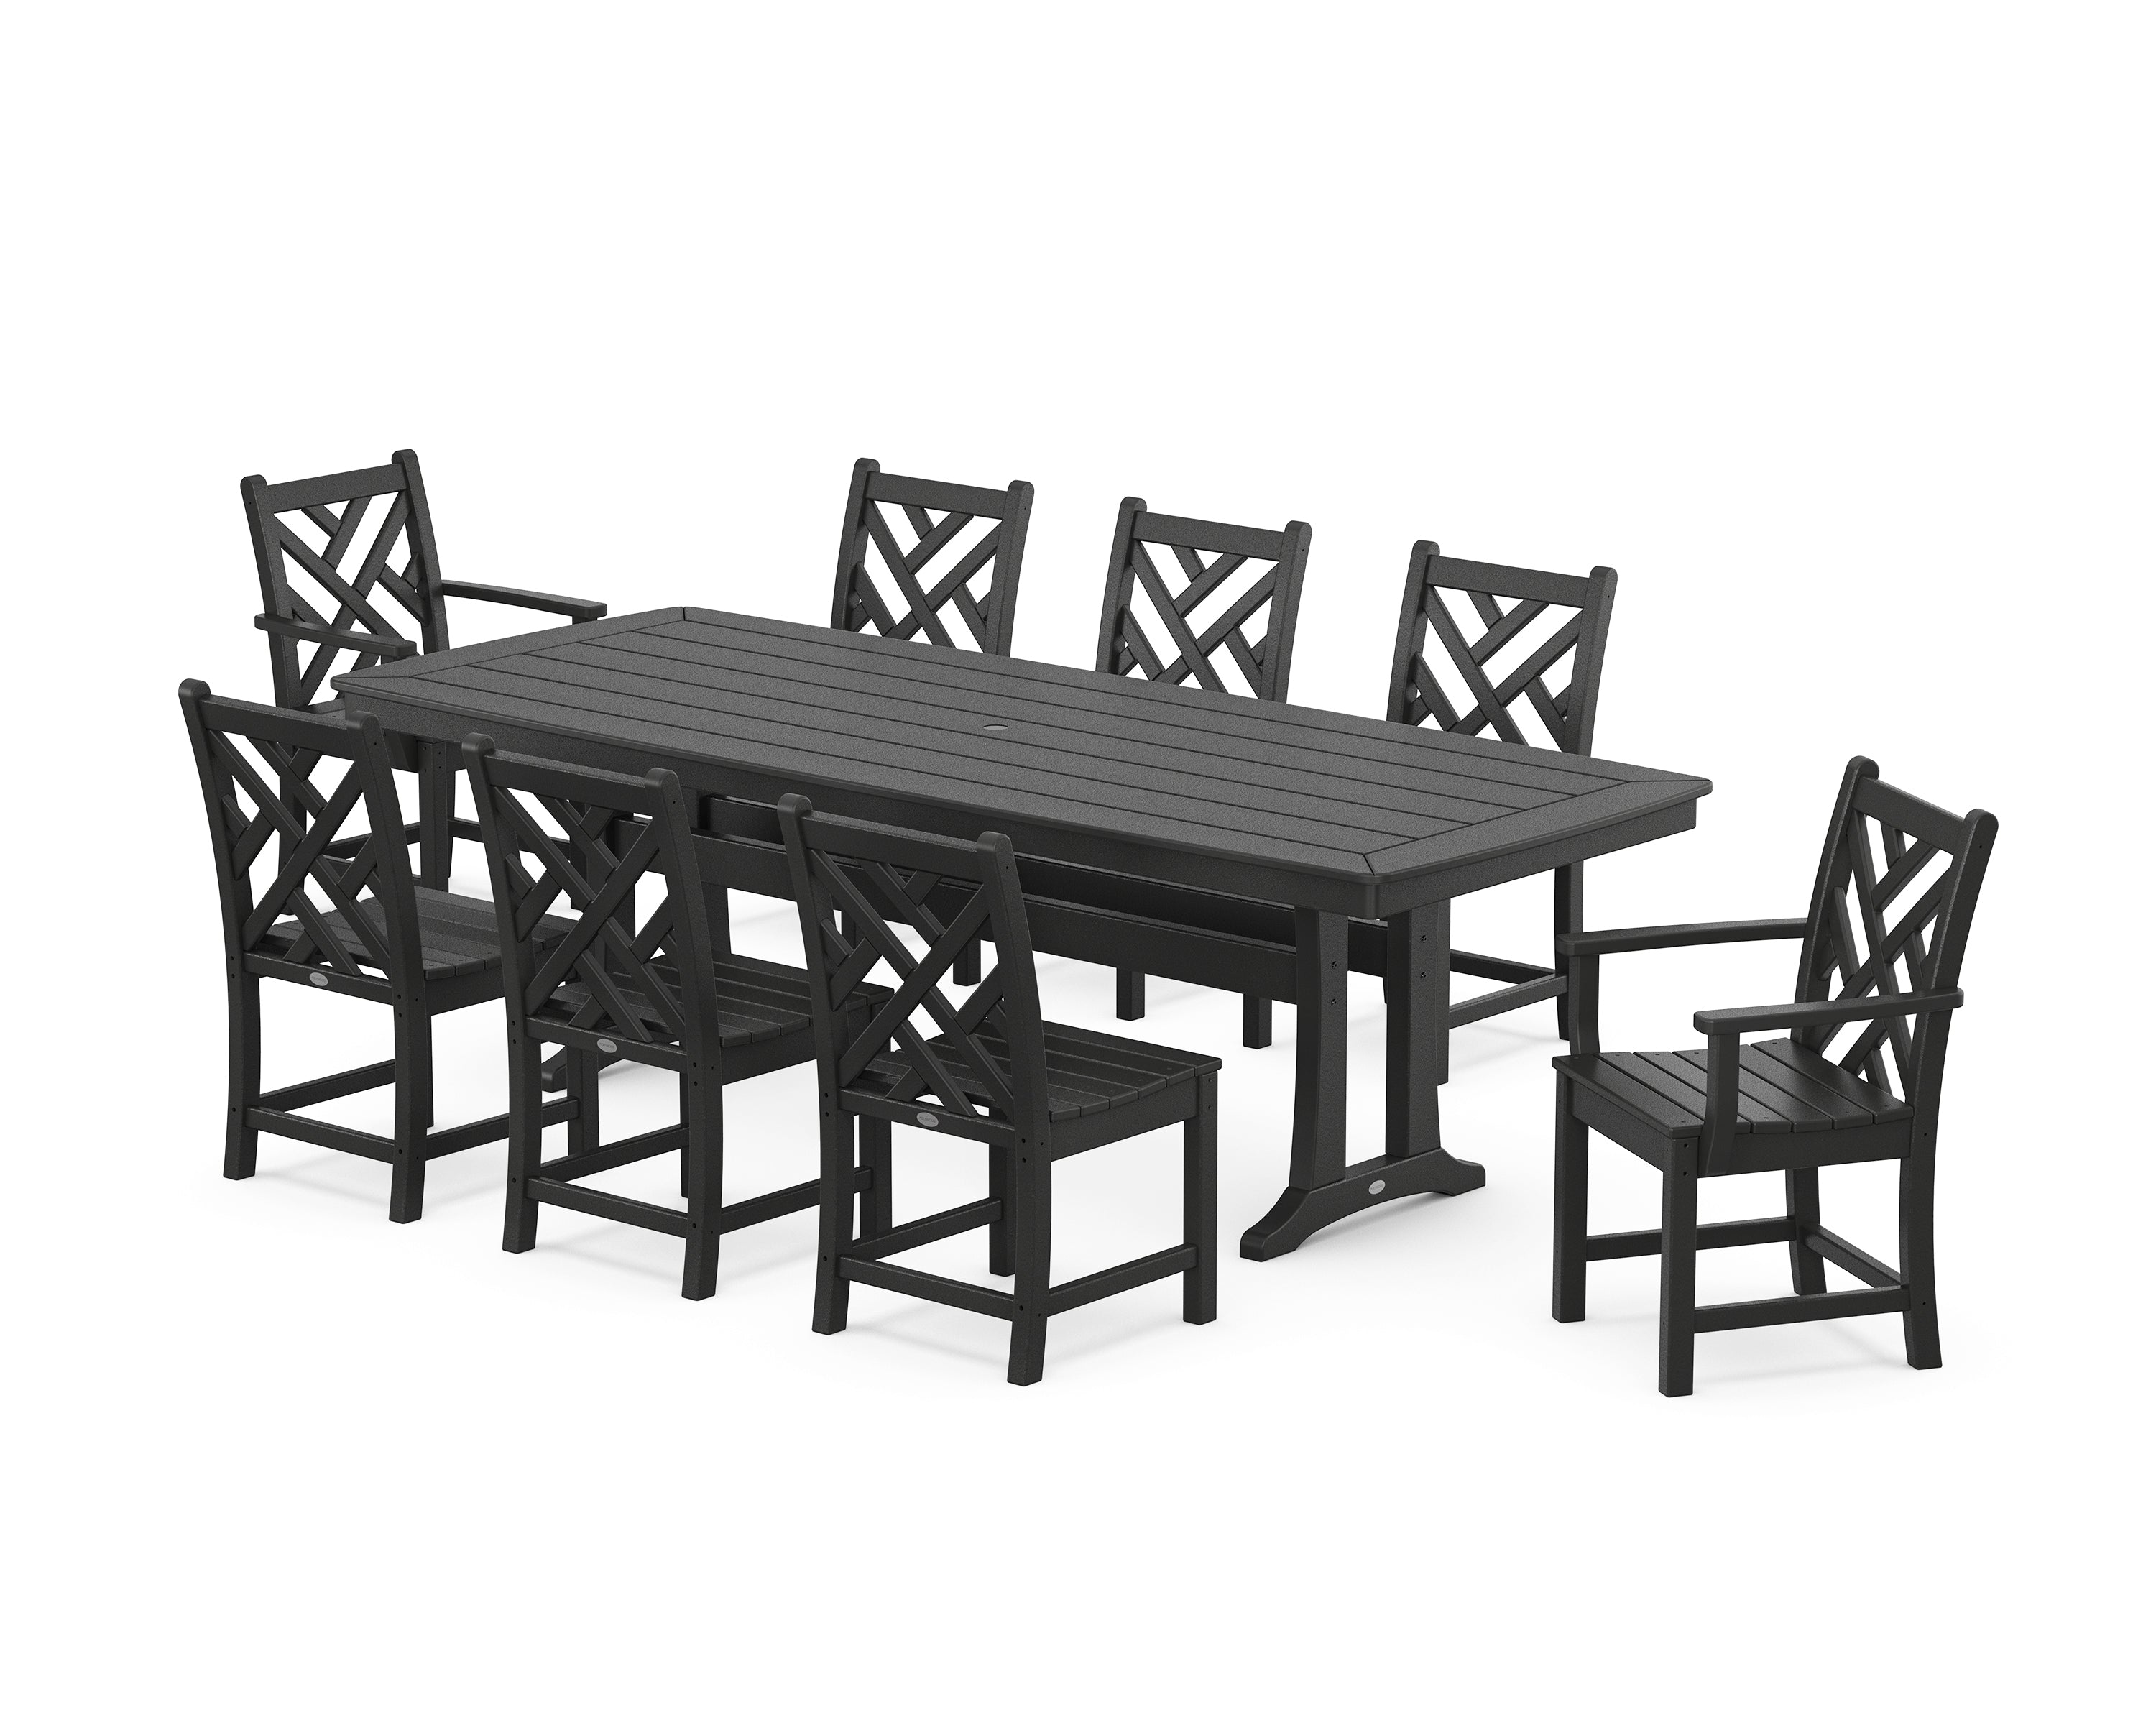 POLYWOOD® Chippendale 9-Piece Dining Set with Trestle Legs in Black